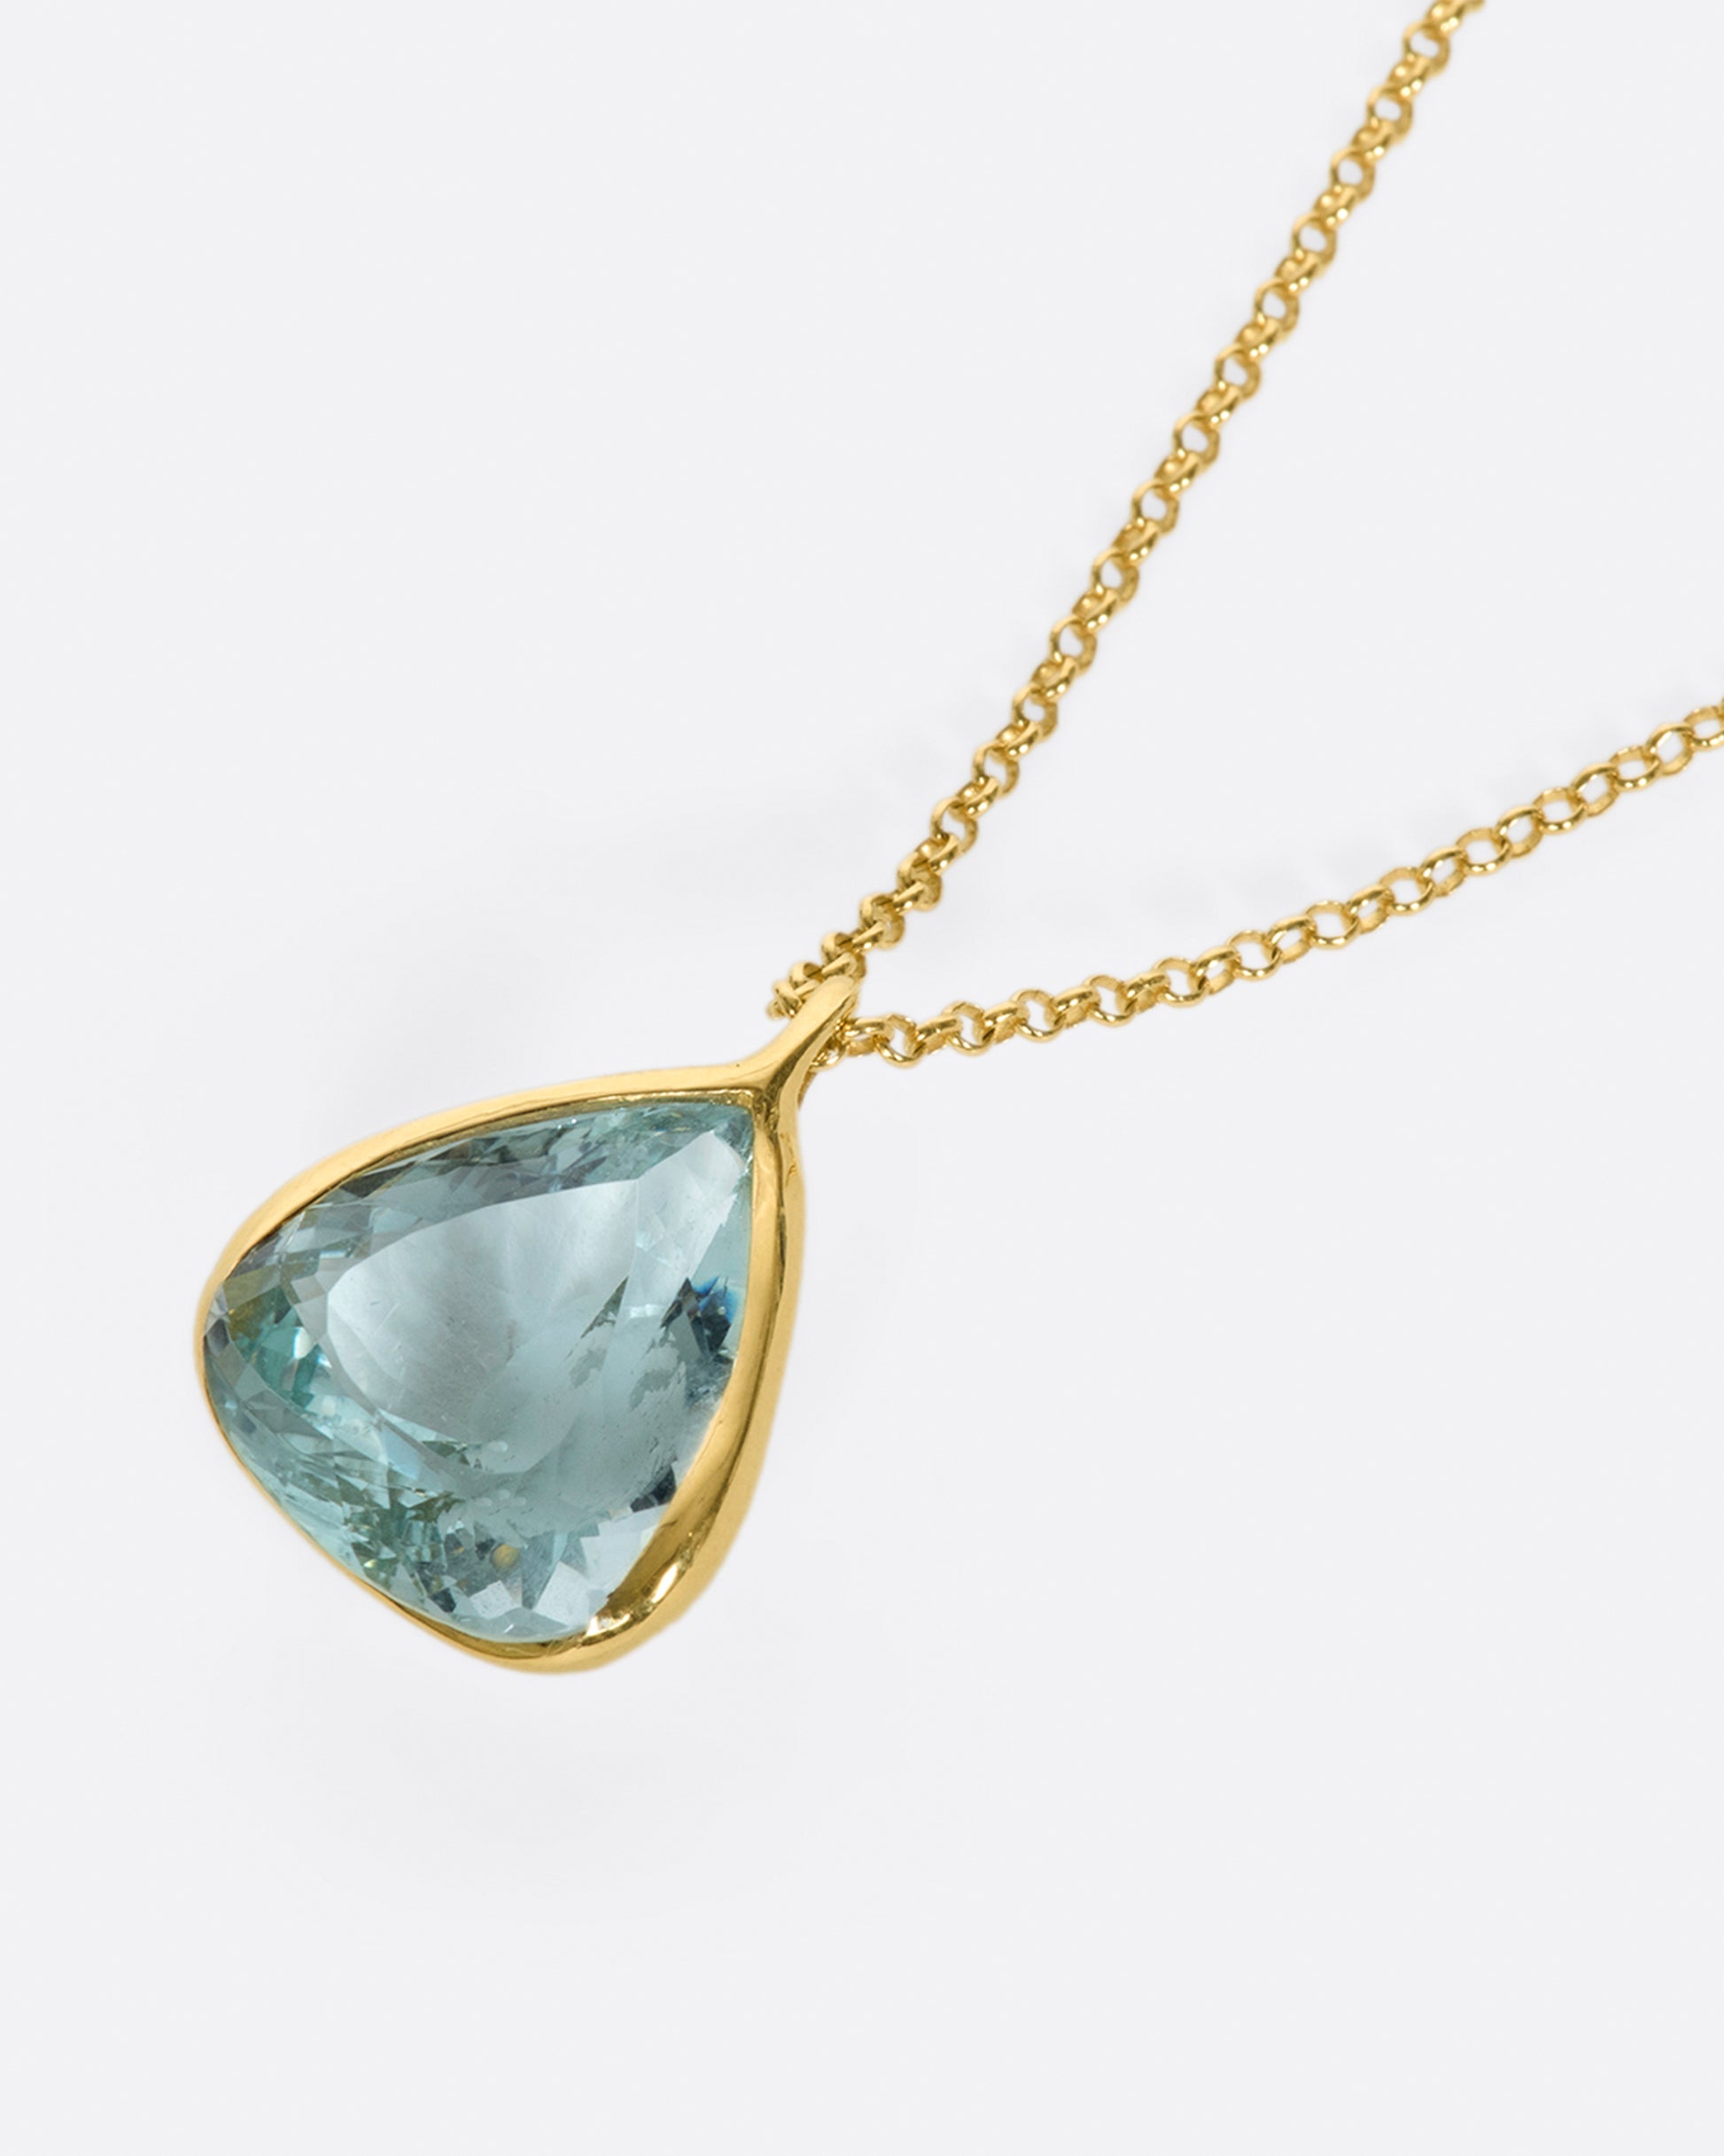 A yellow gold cable chain necklace with a large triangular aquamarine pendant